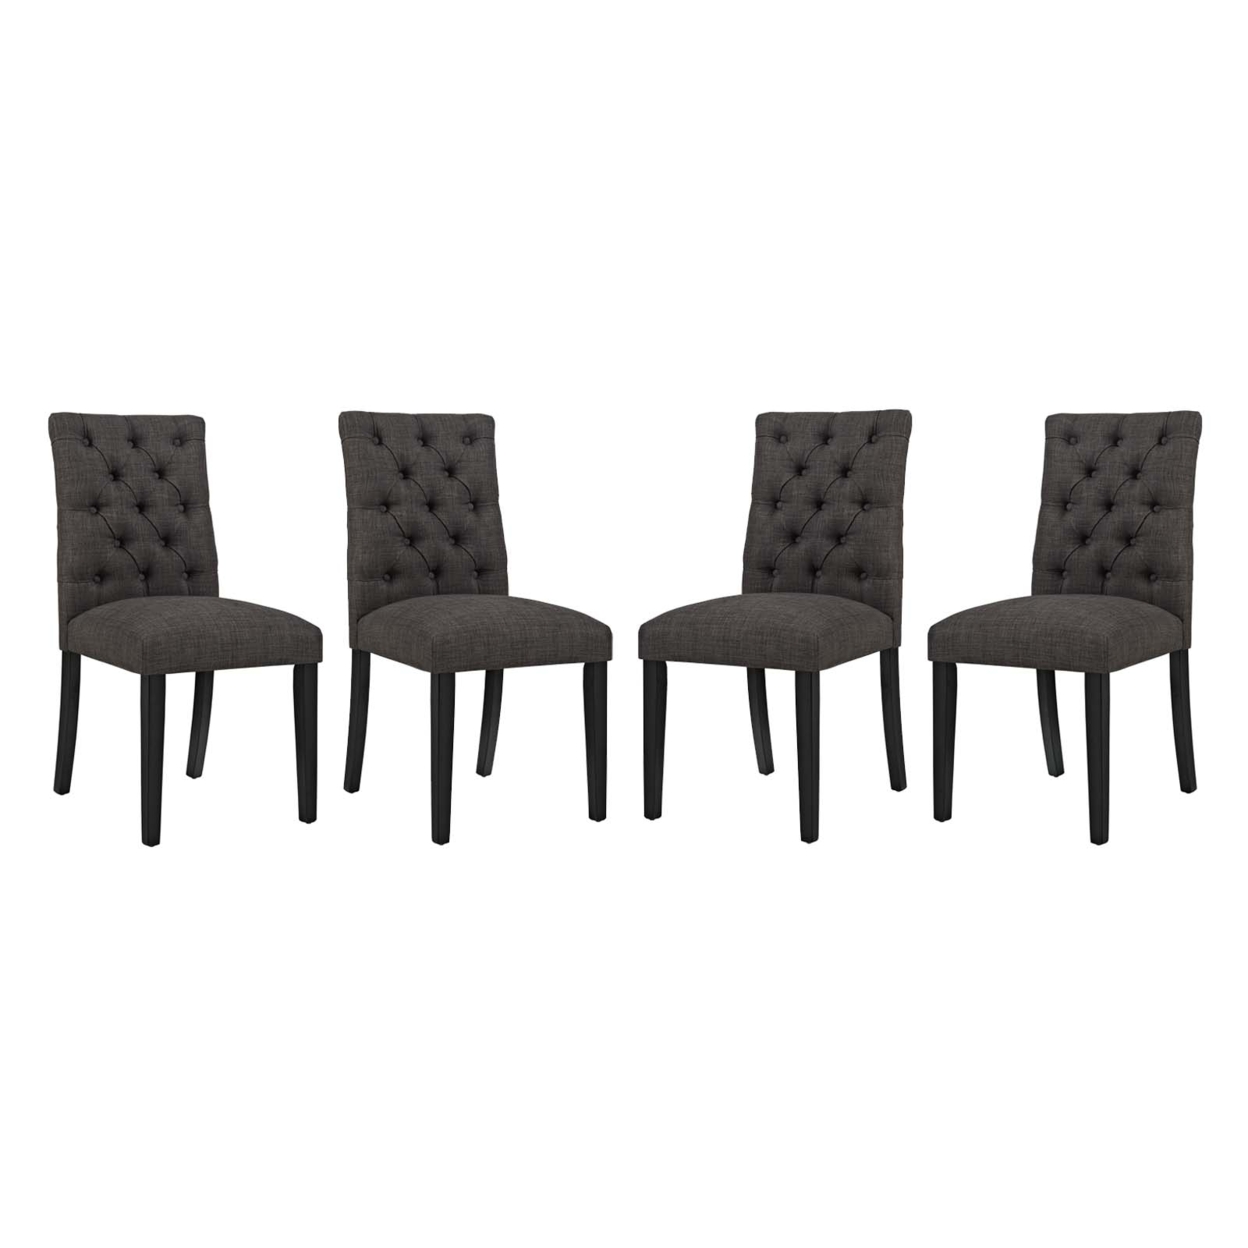 Duchess Dining Chair Fabric Set Of 4,Brown